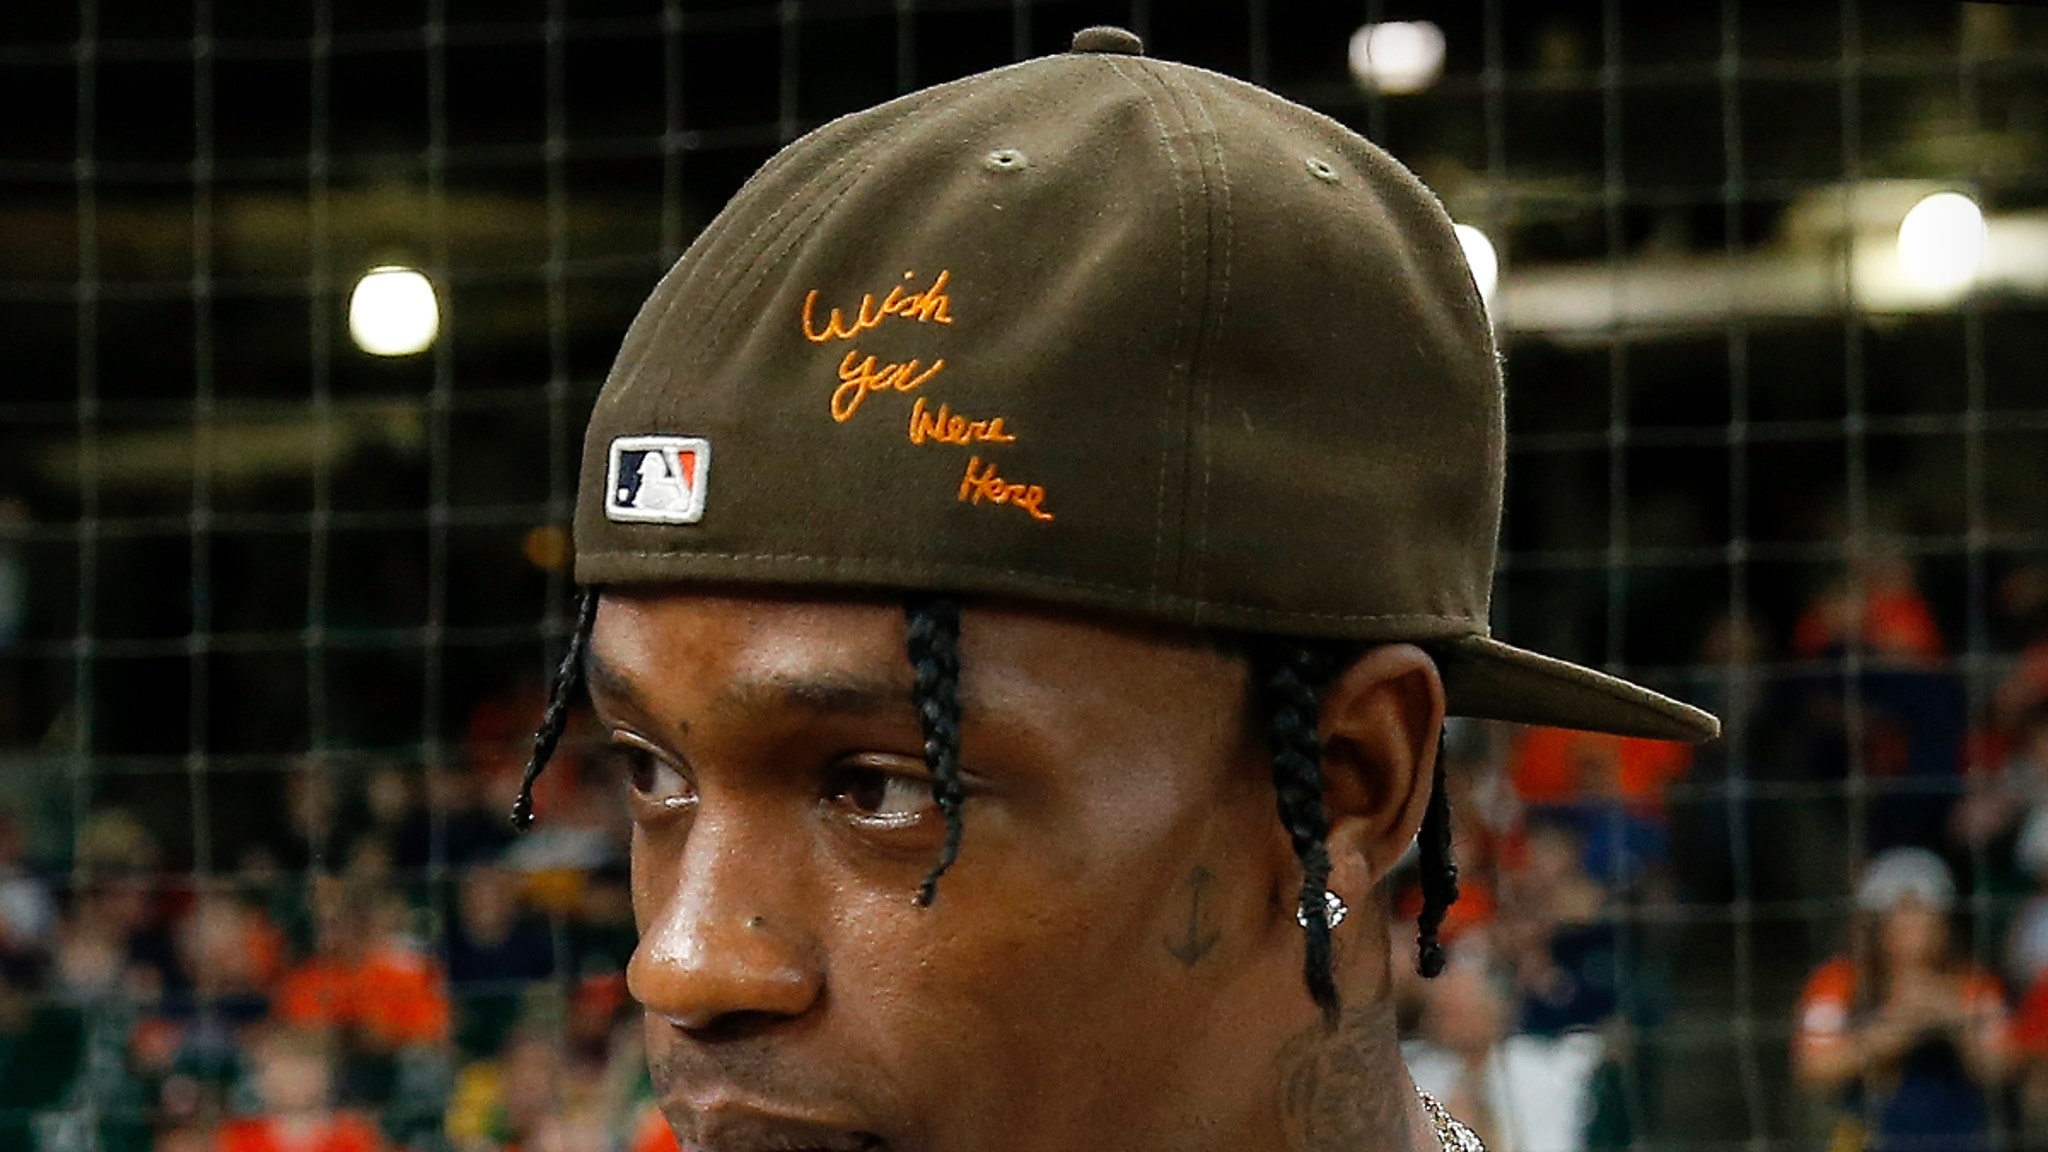 Travis Scott Went to Dave & Buster’s After Astroworld Festival Unaware of Tragedy – TMZ